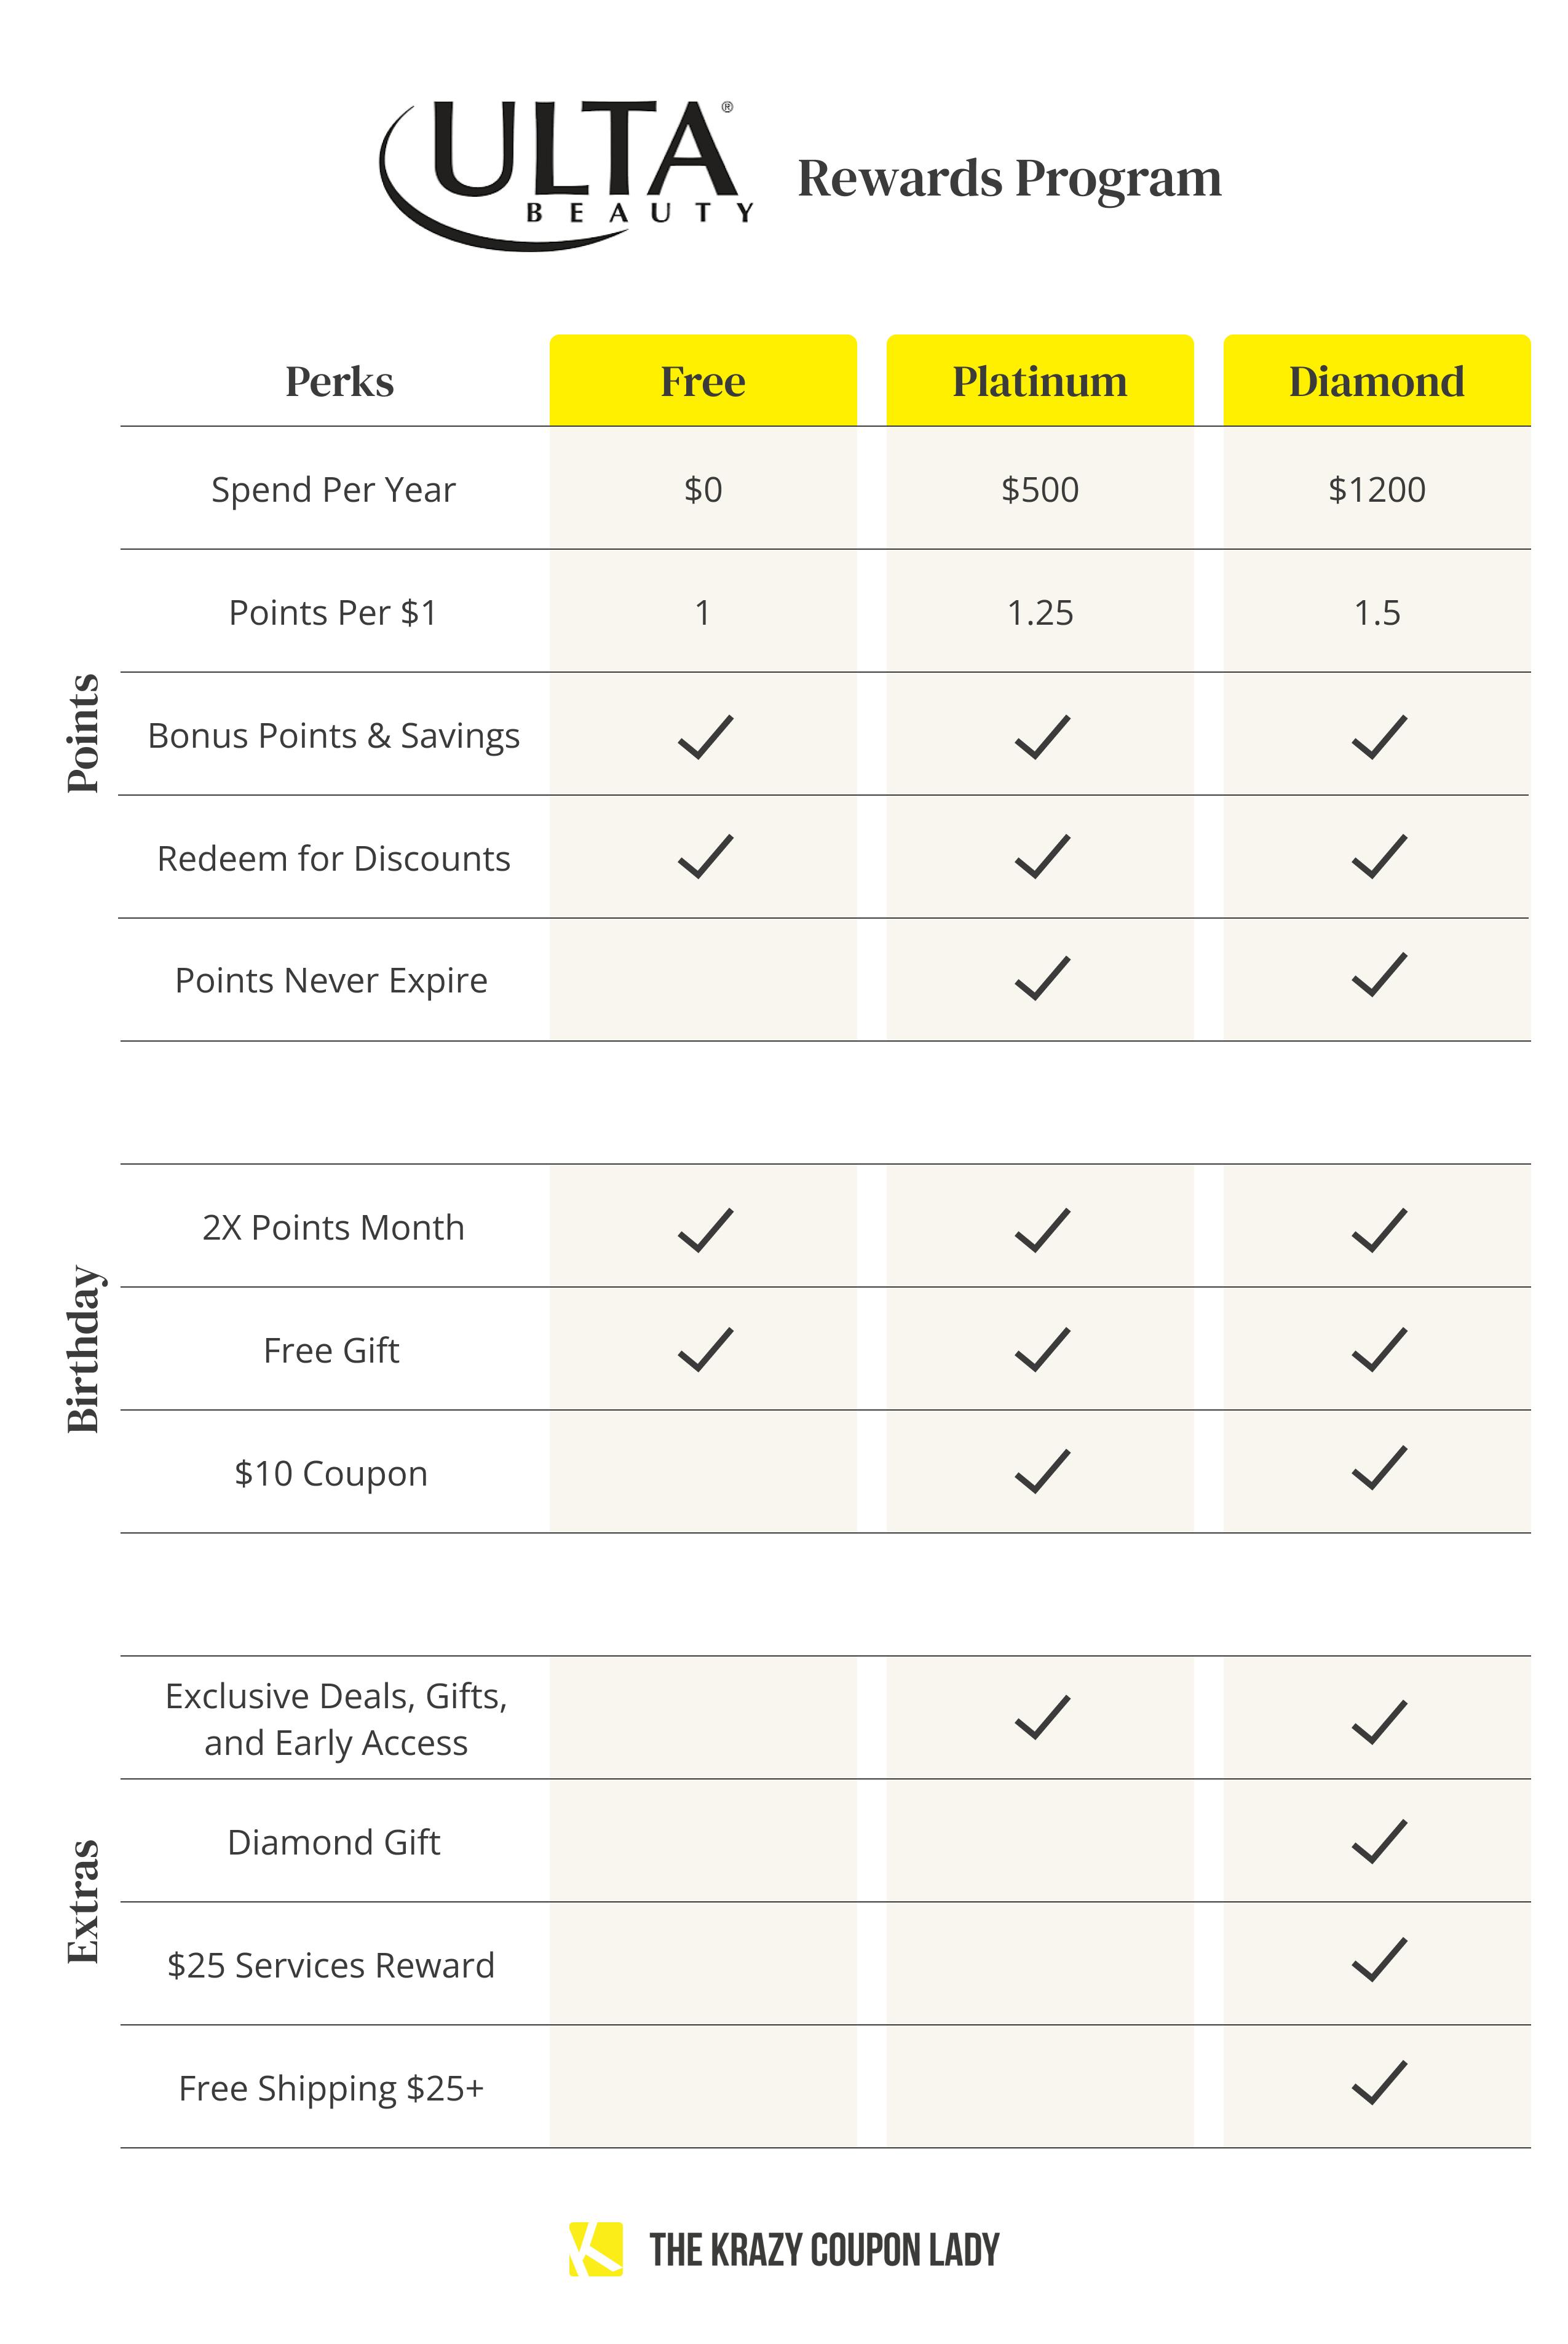 a chart comparing the different benefits of Ulta Beauty's rewards program (aka Ultamate Rewards), which has three different tiers: Free, Platinum, and Diamond